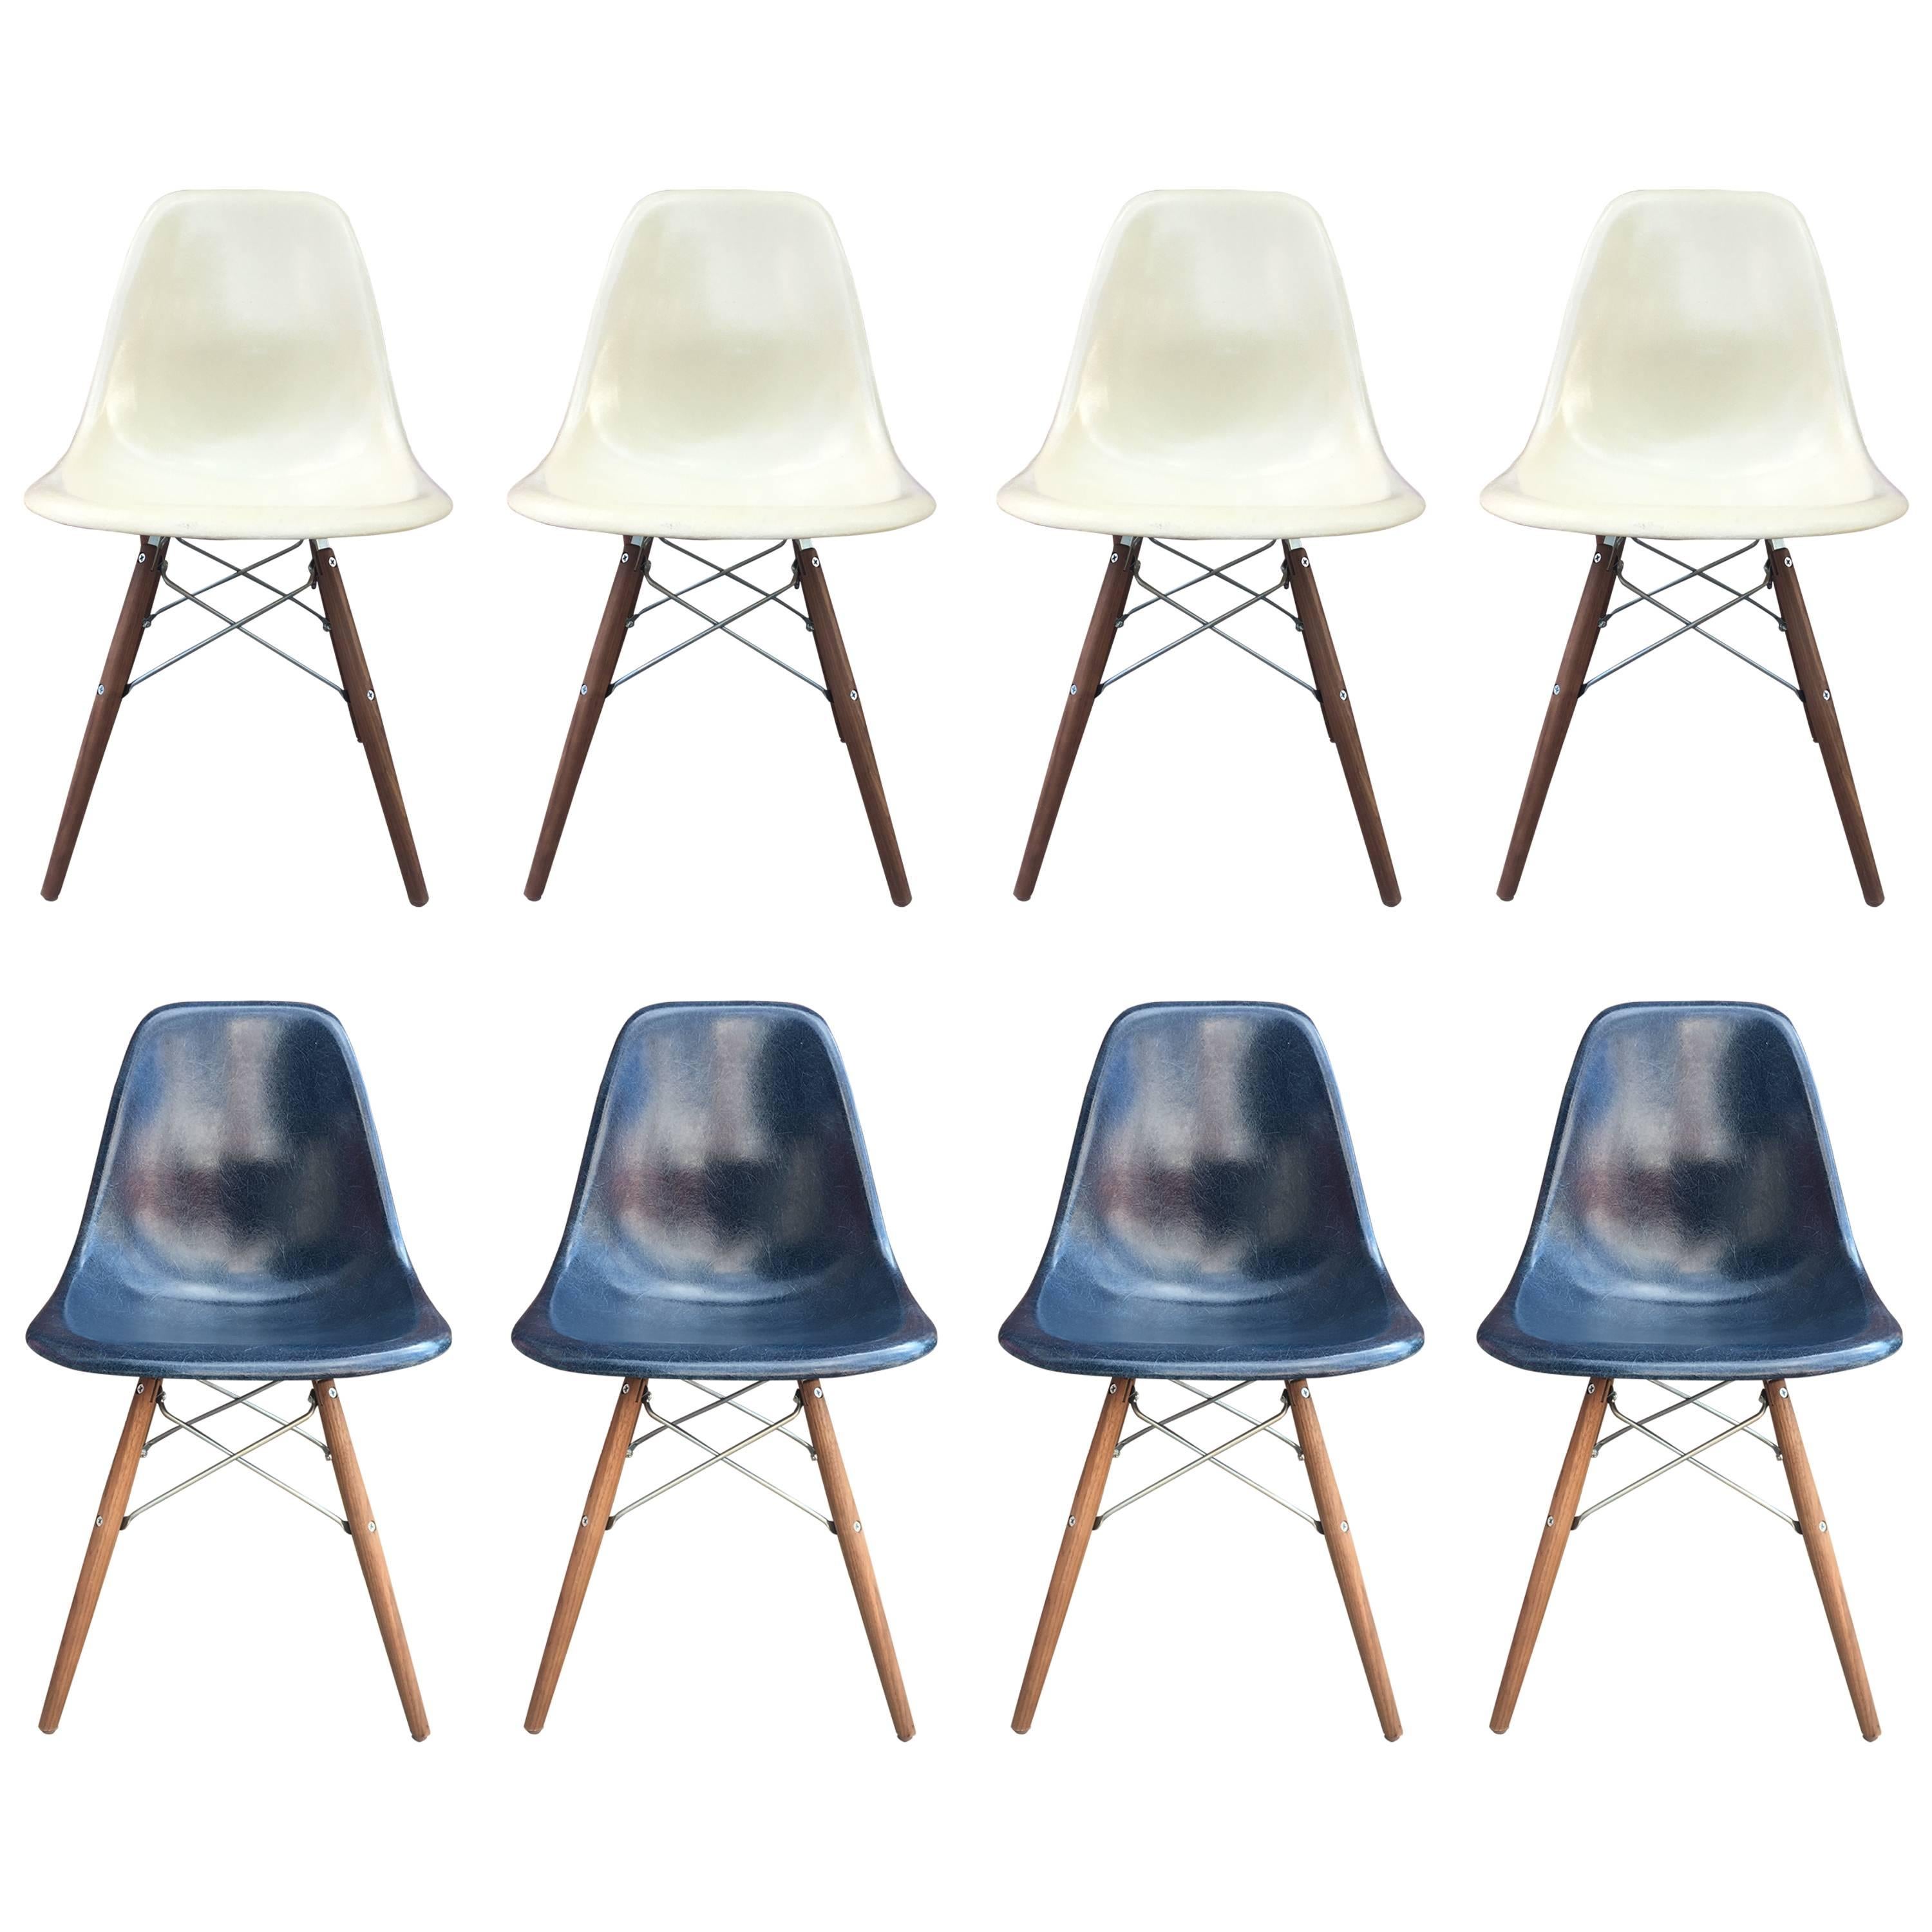 Eight Herman Miller Eames Dining Chairs in Navy and Parchment